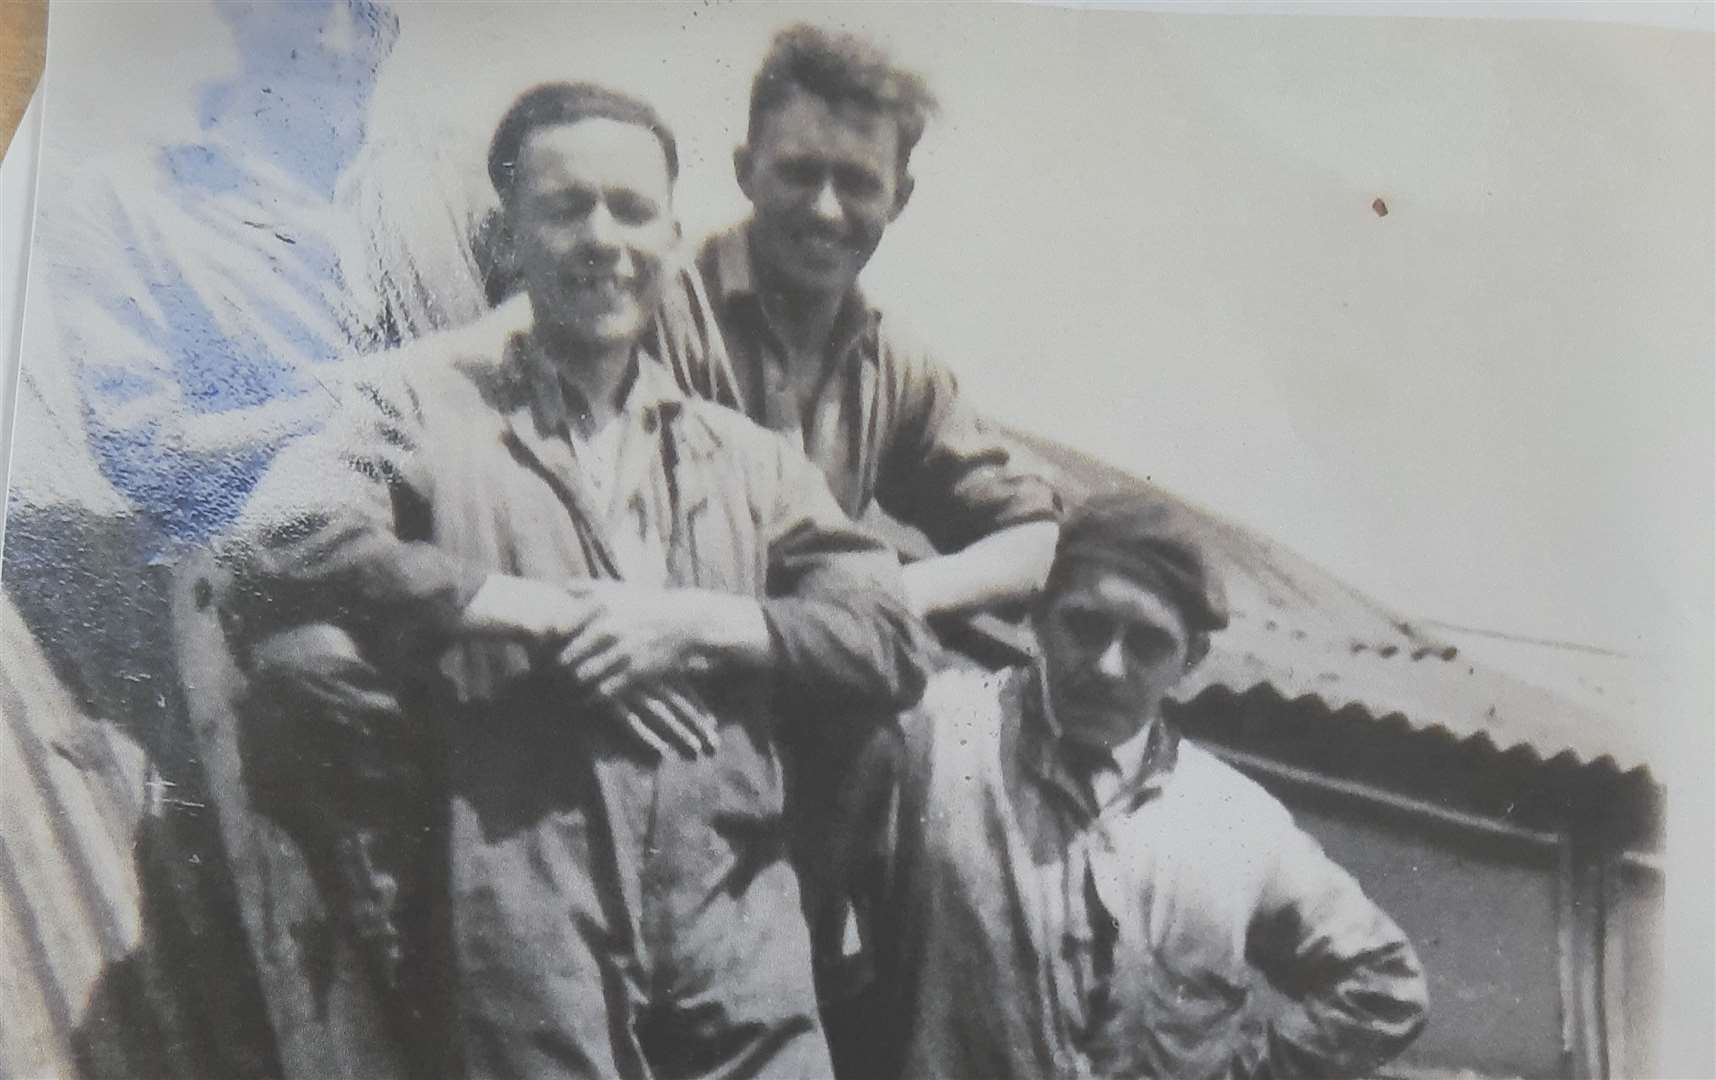 Herbert's father Herbert Sr at Dover Eastern Docks, early 1940s. Mr Crack is pictured far right, with a beret, Picture: Herbert Crack Jr